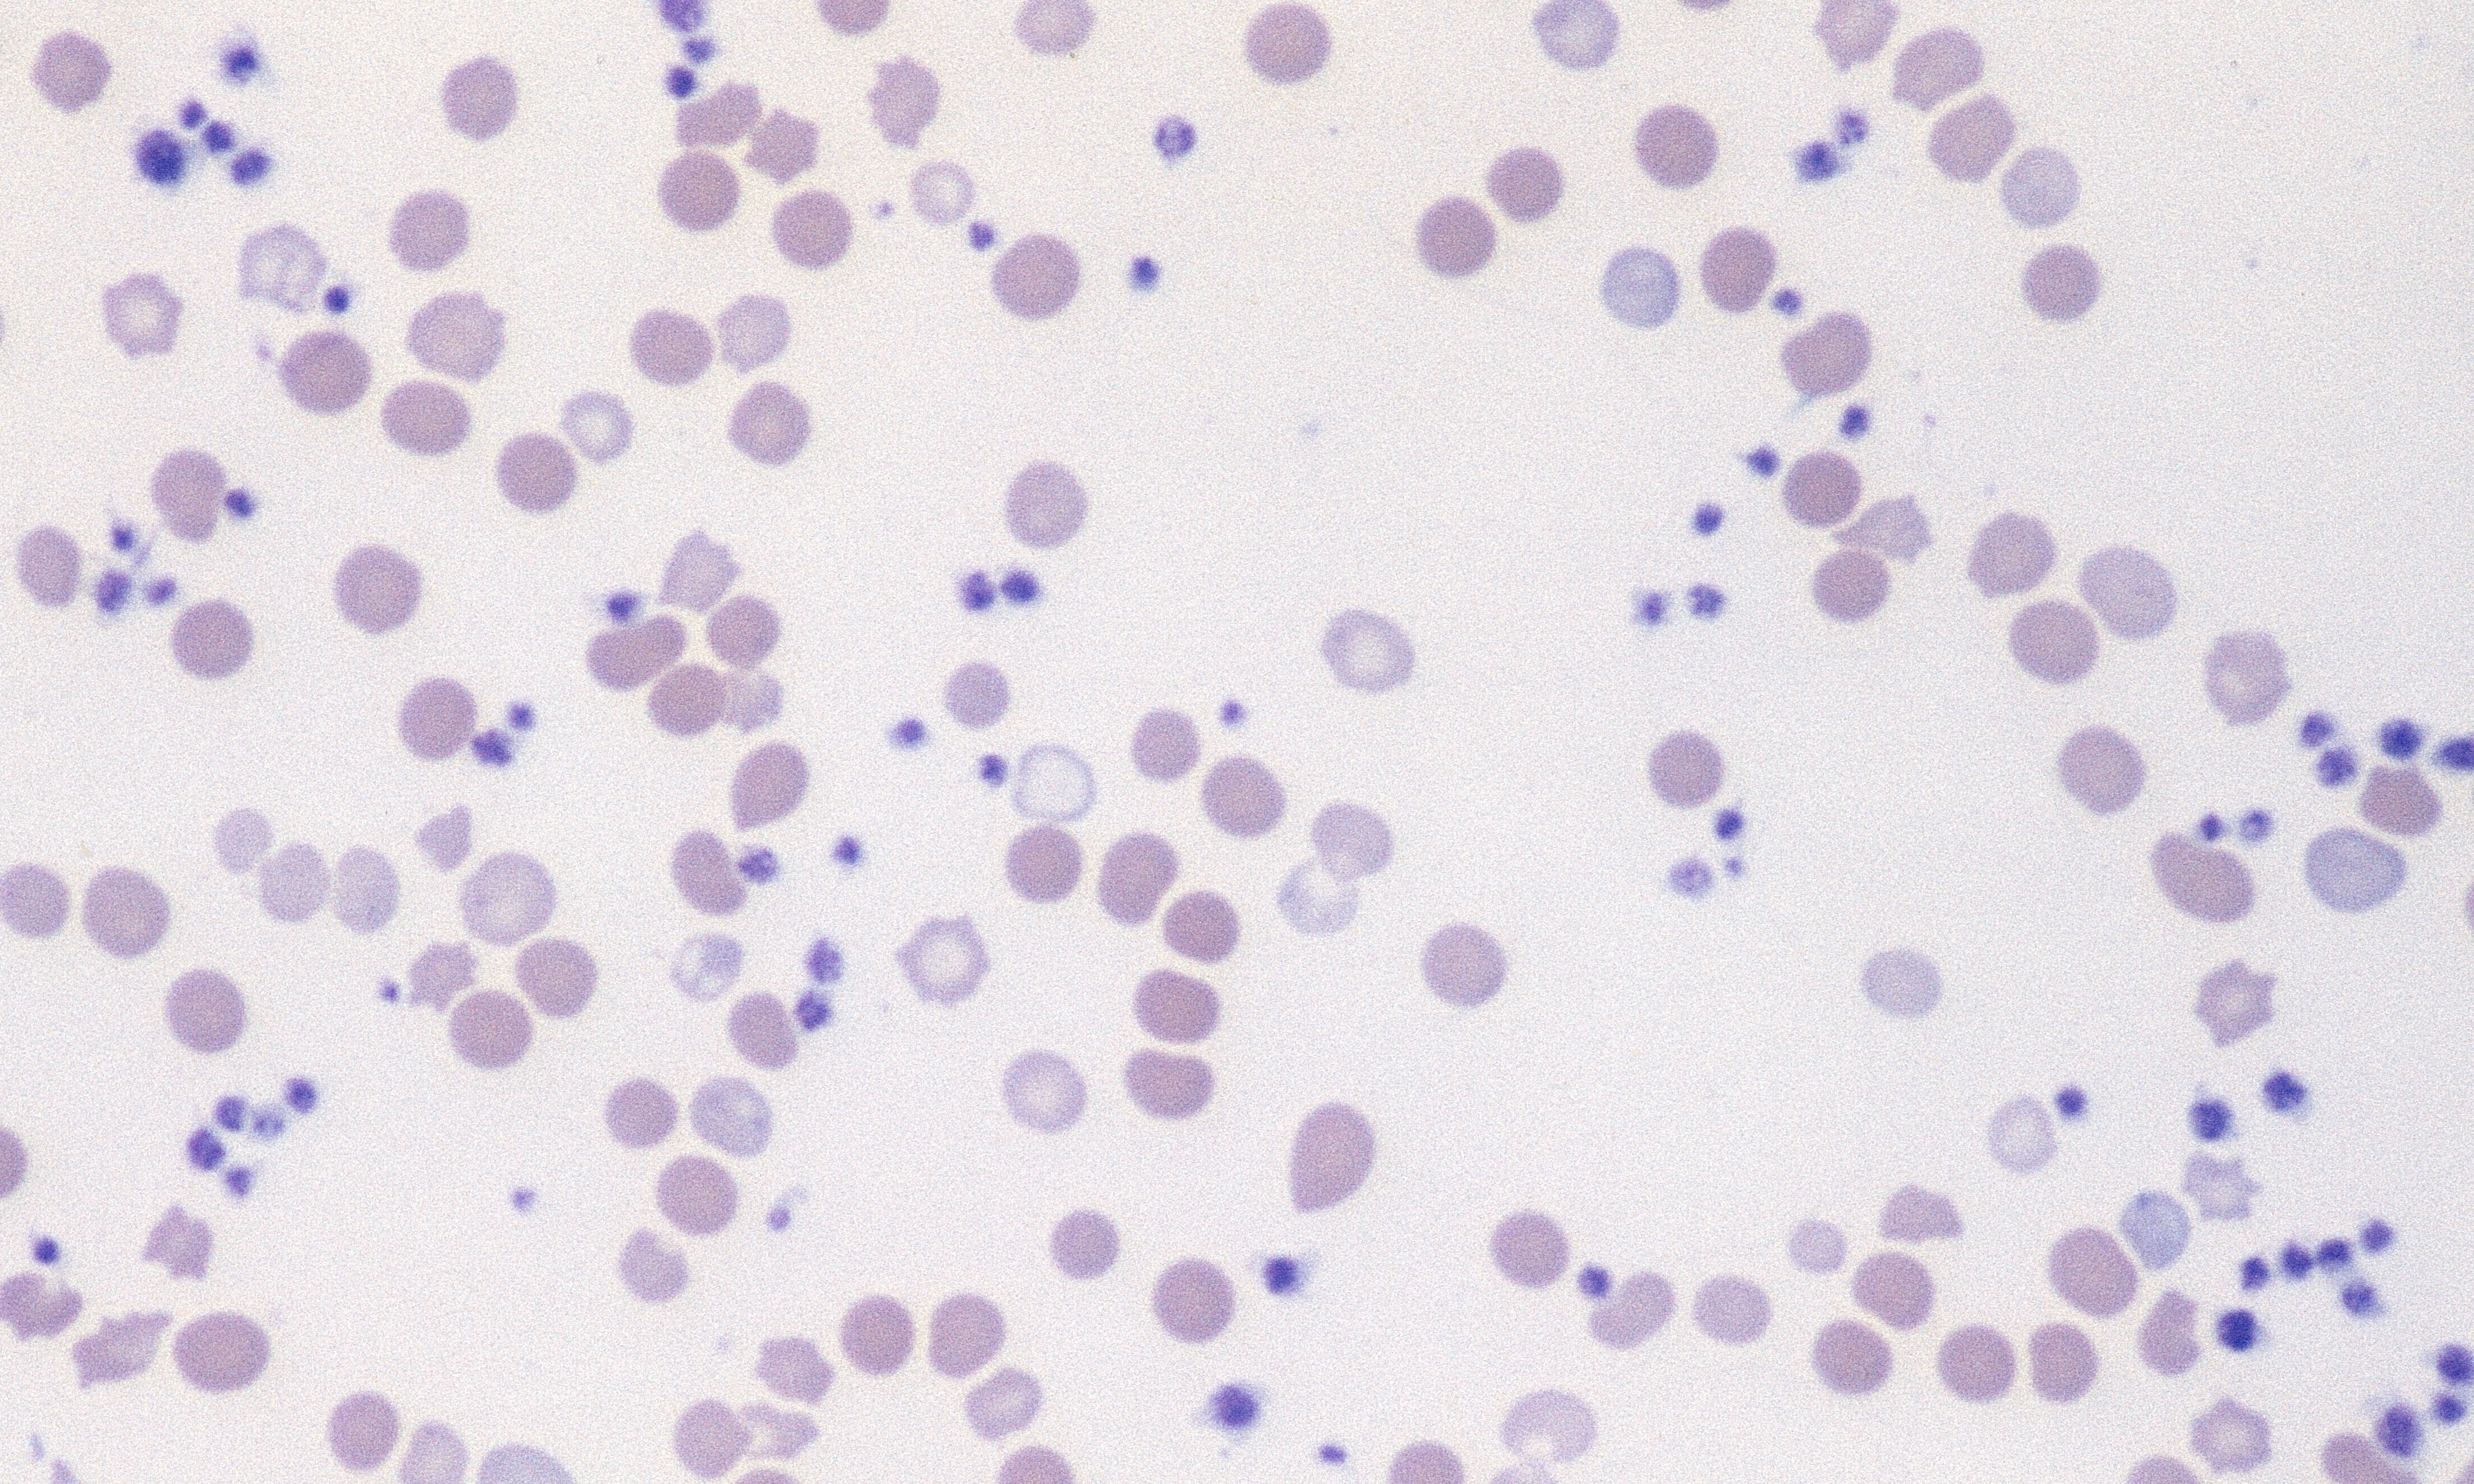 Platelets 12 (Canine 5 - Iron Deficiency) - Thrombocytosis